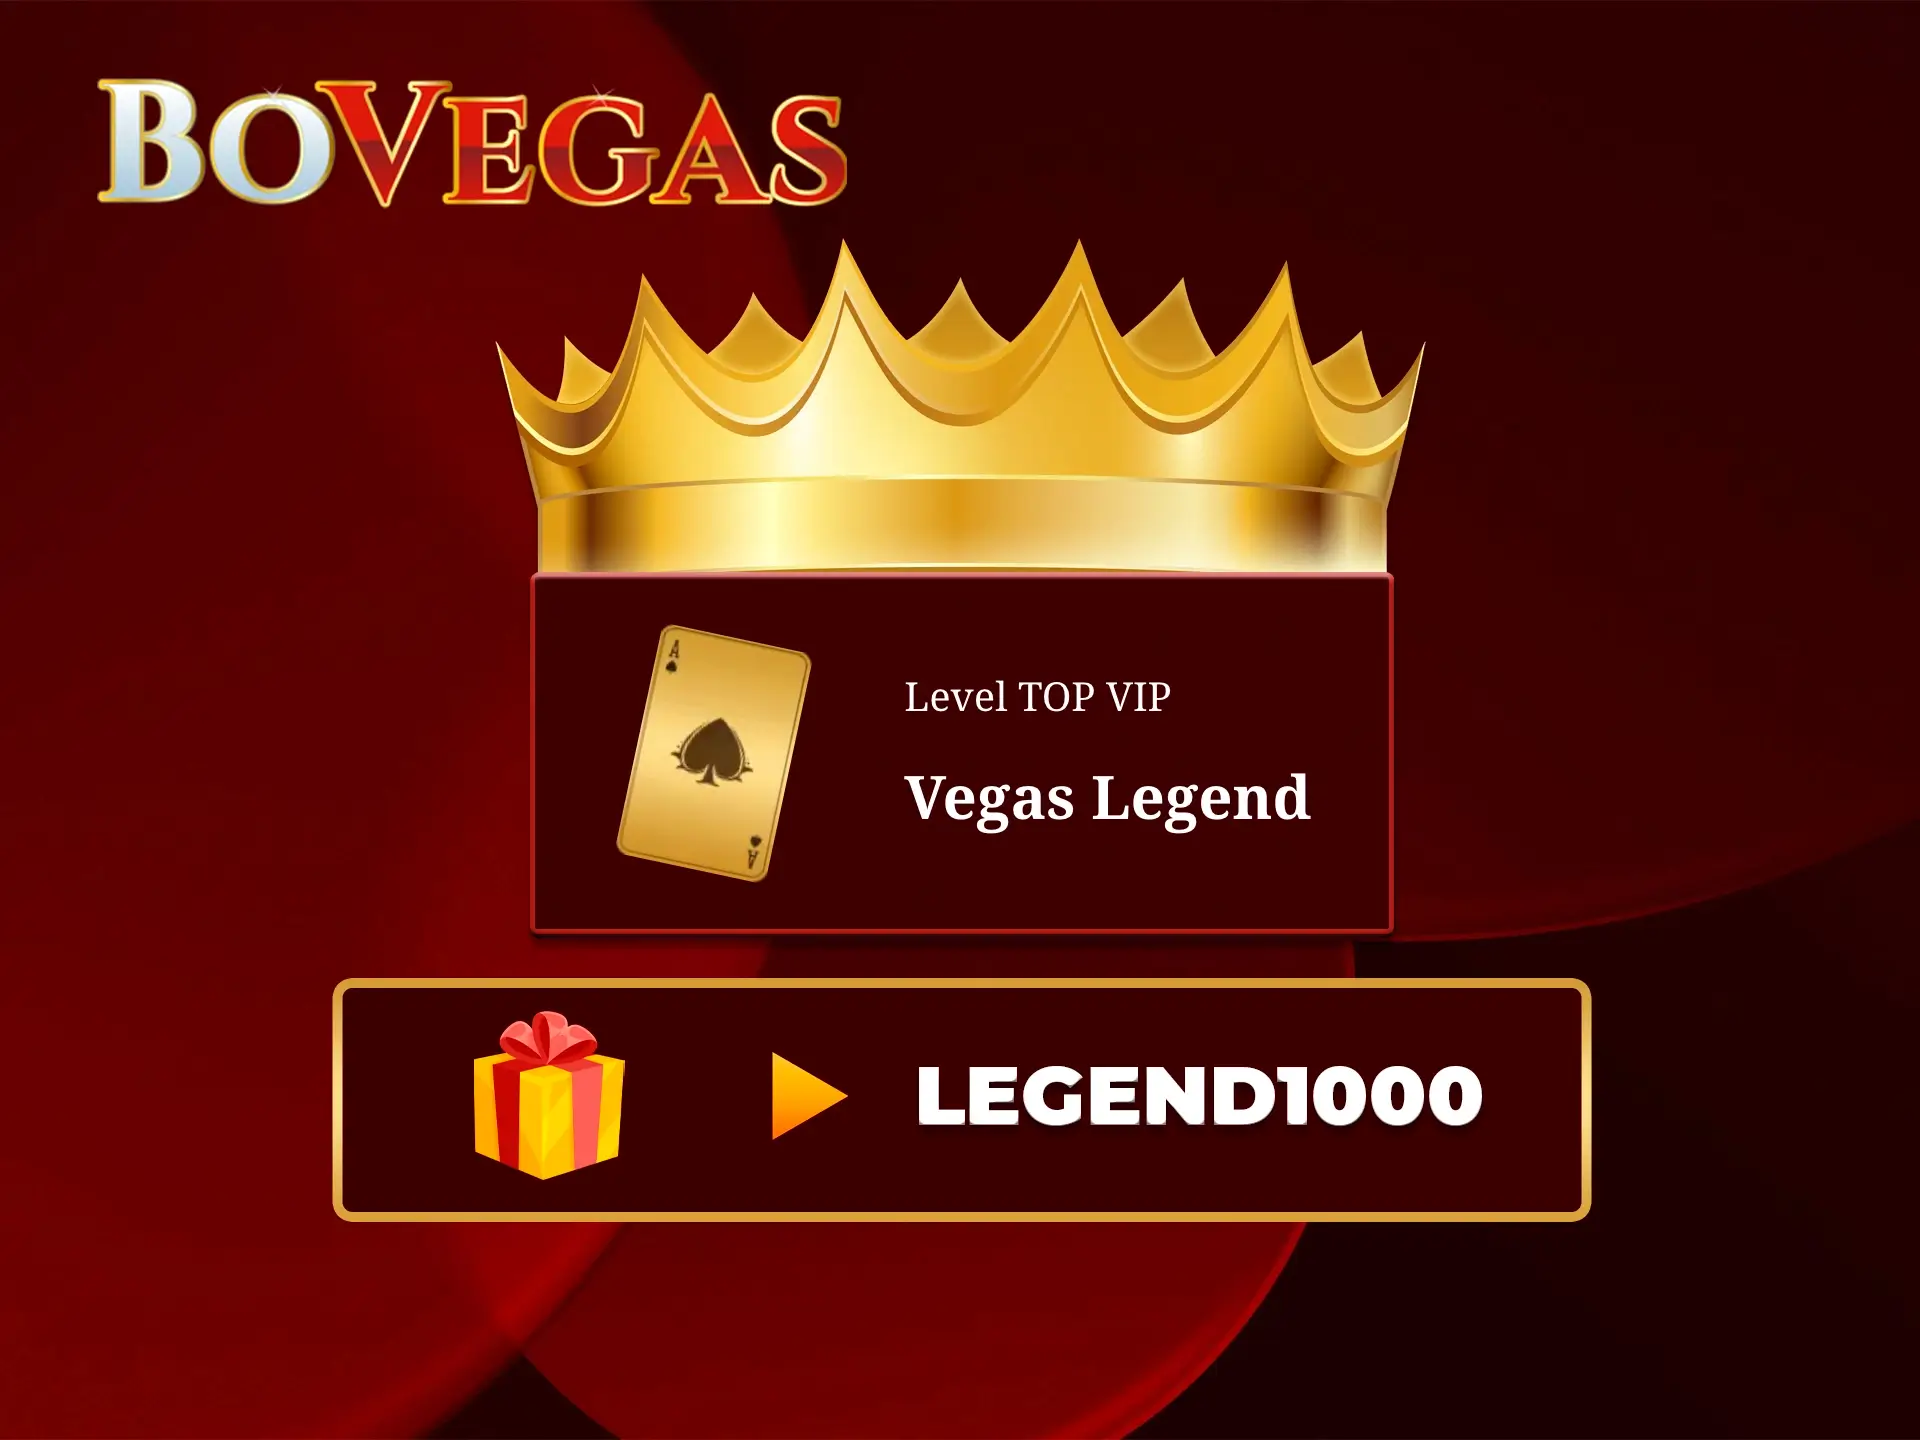 Become a BoVegas casino legend with the biggest bonuses and personalised bonuses.